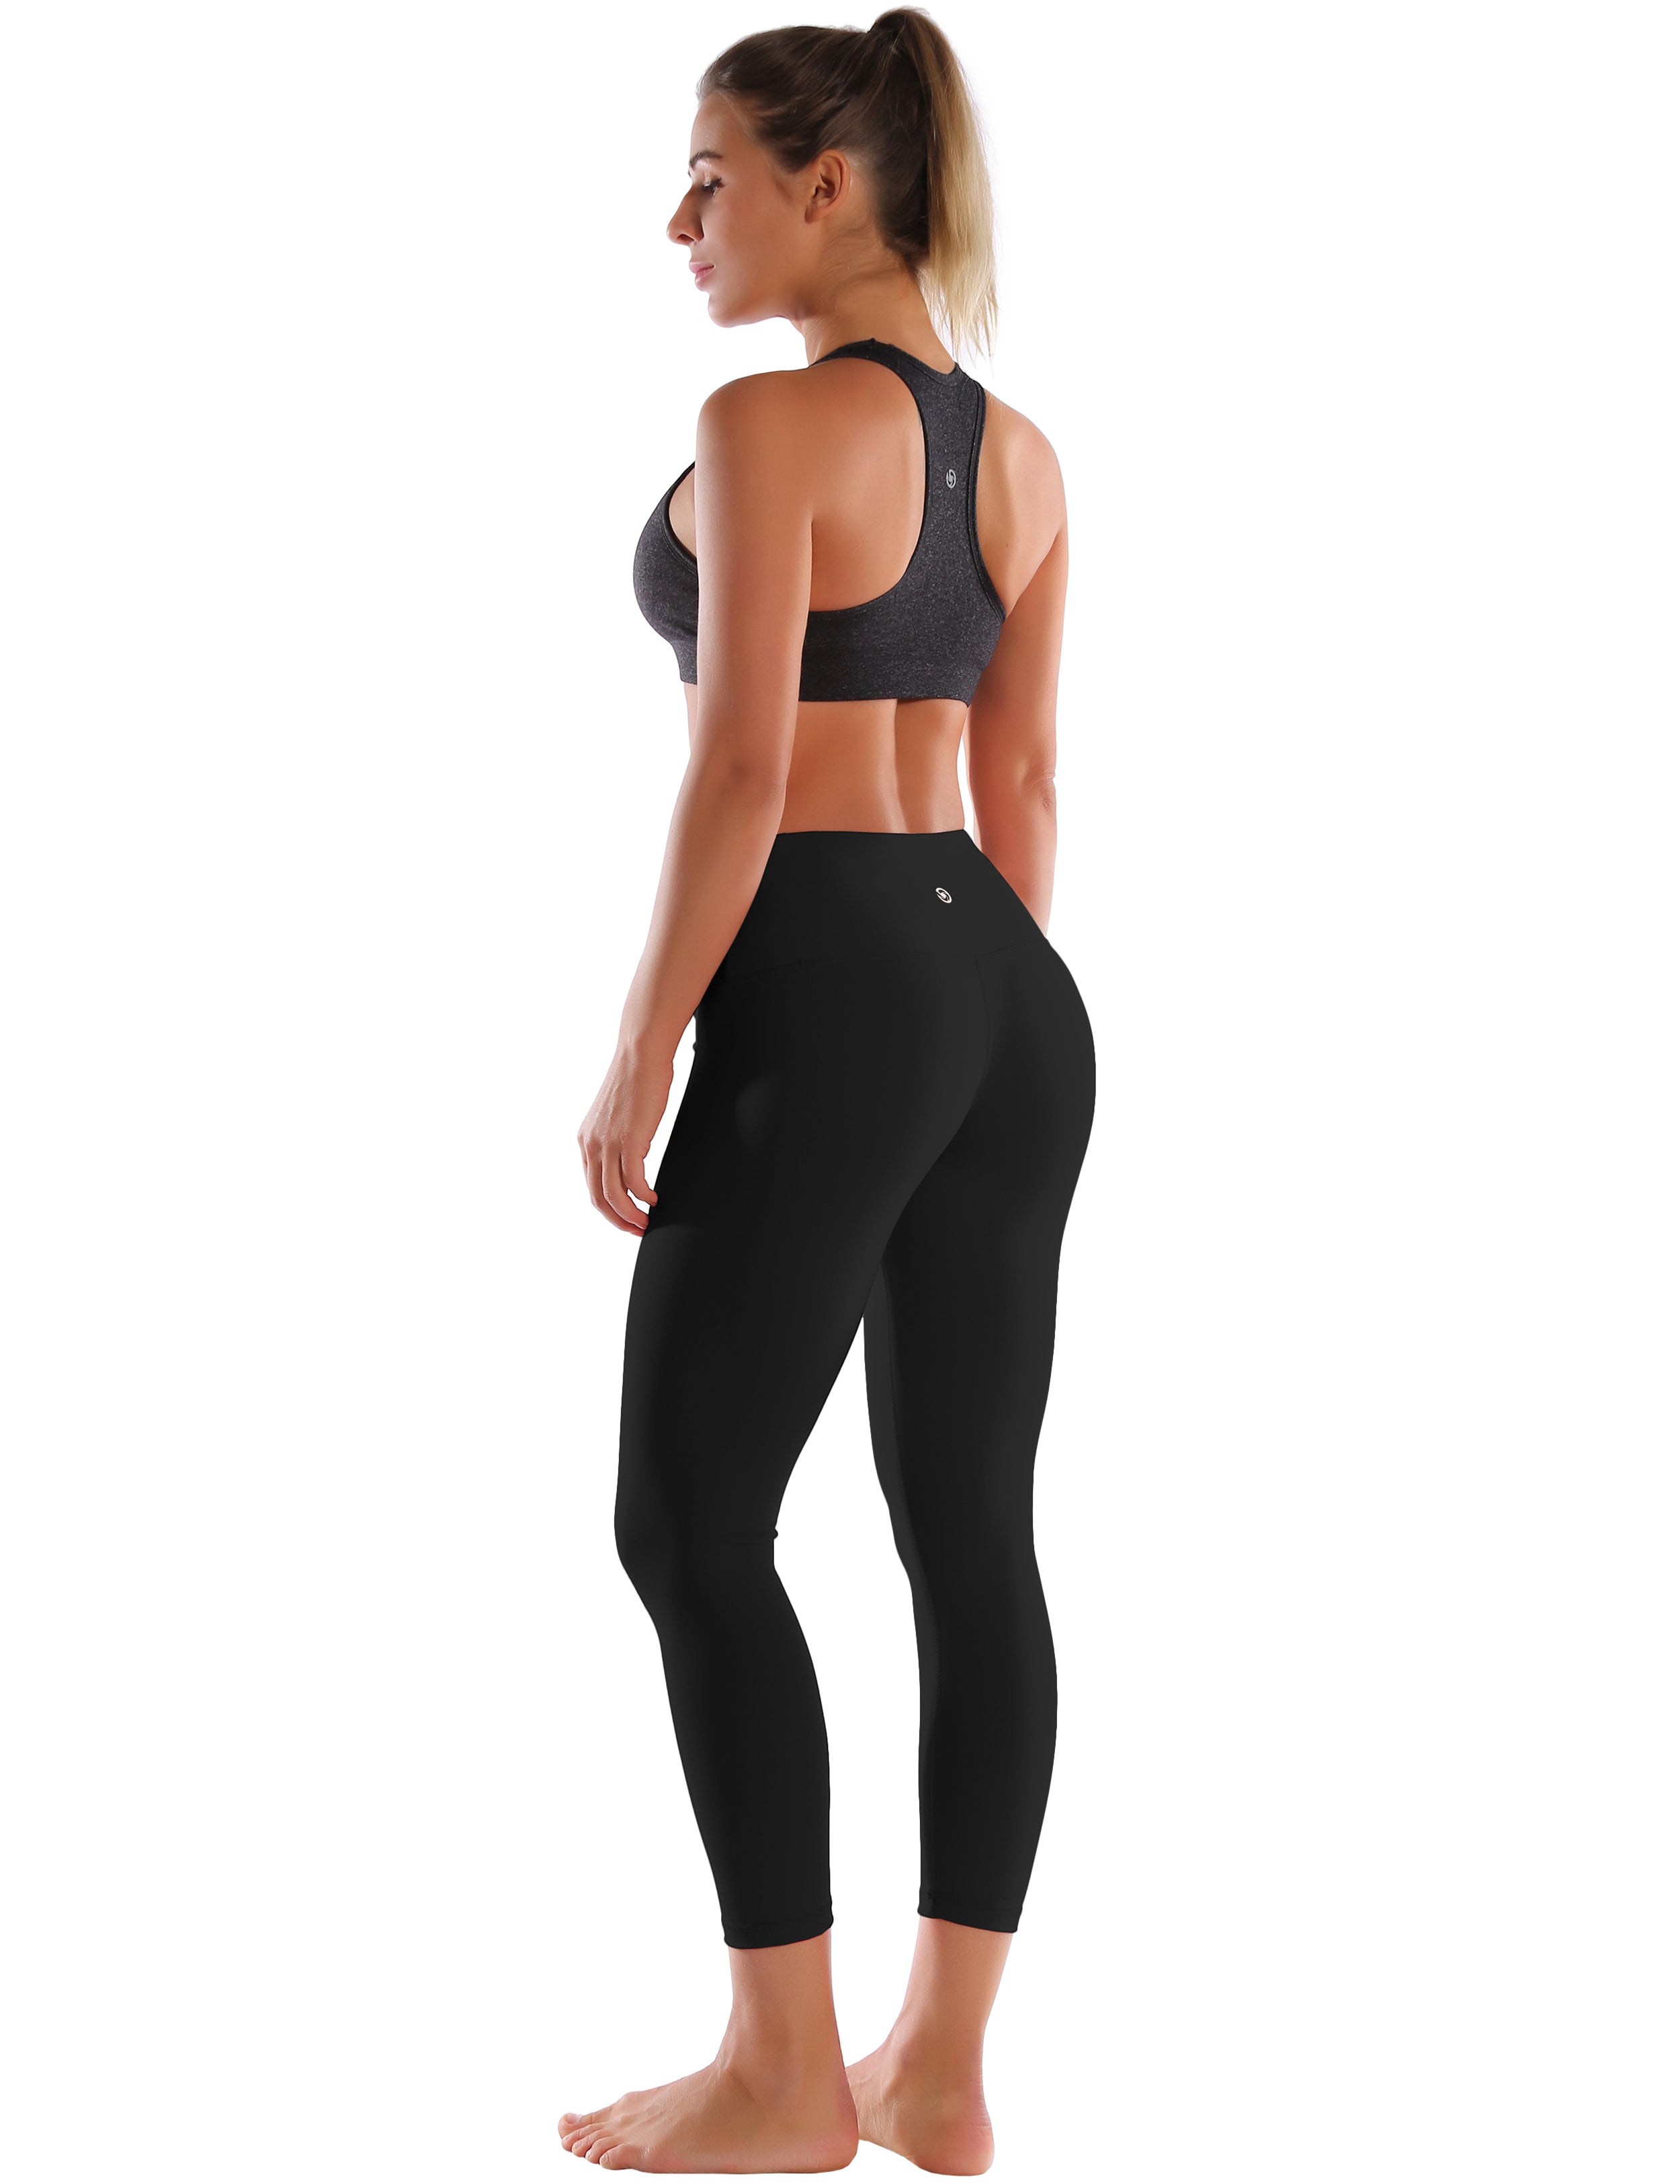 22" High Waist Crop Tight Capris black 75%Nylon/25%Spandex Fabric doesn't attract lint easily 4-way stretch No see-through Moisture-wicking Tummy control Inner pocket